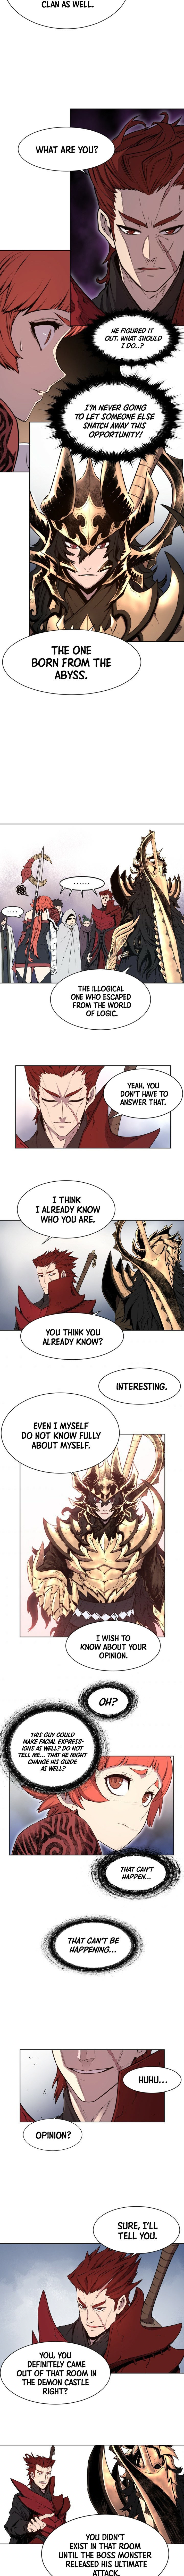 Legend of Mir: Gold Armored Dragon - Chapter 4 Page 6